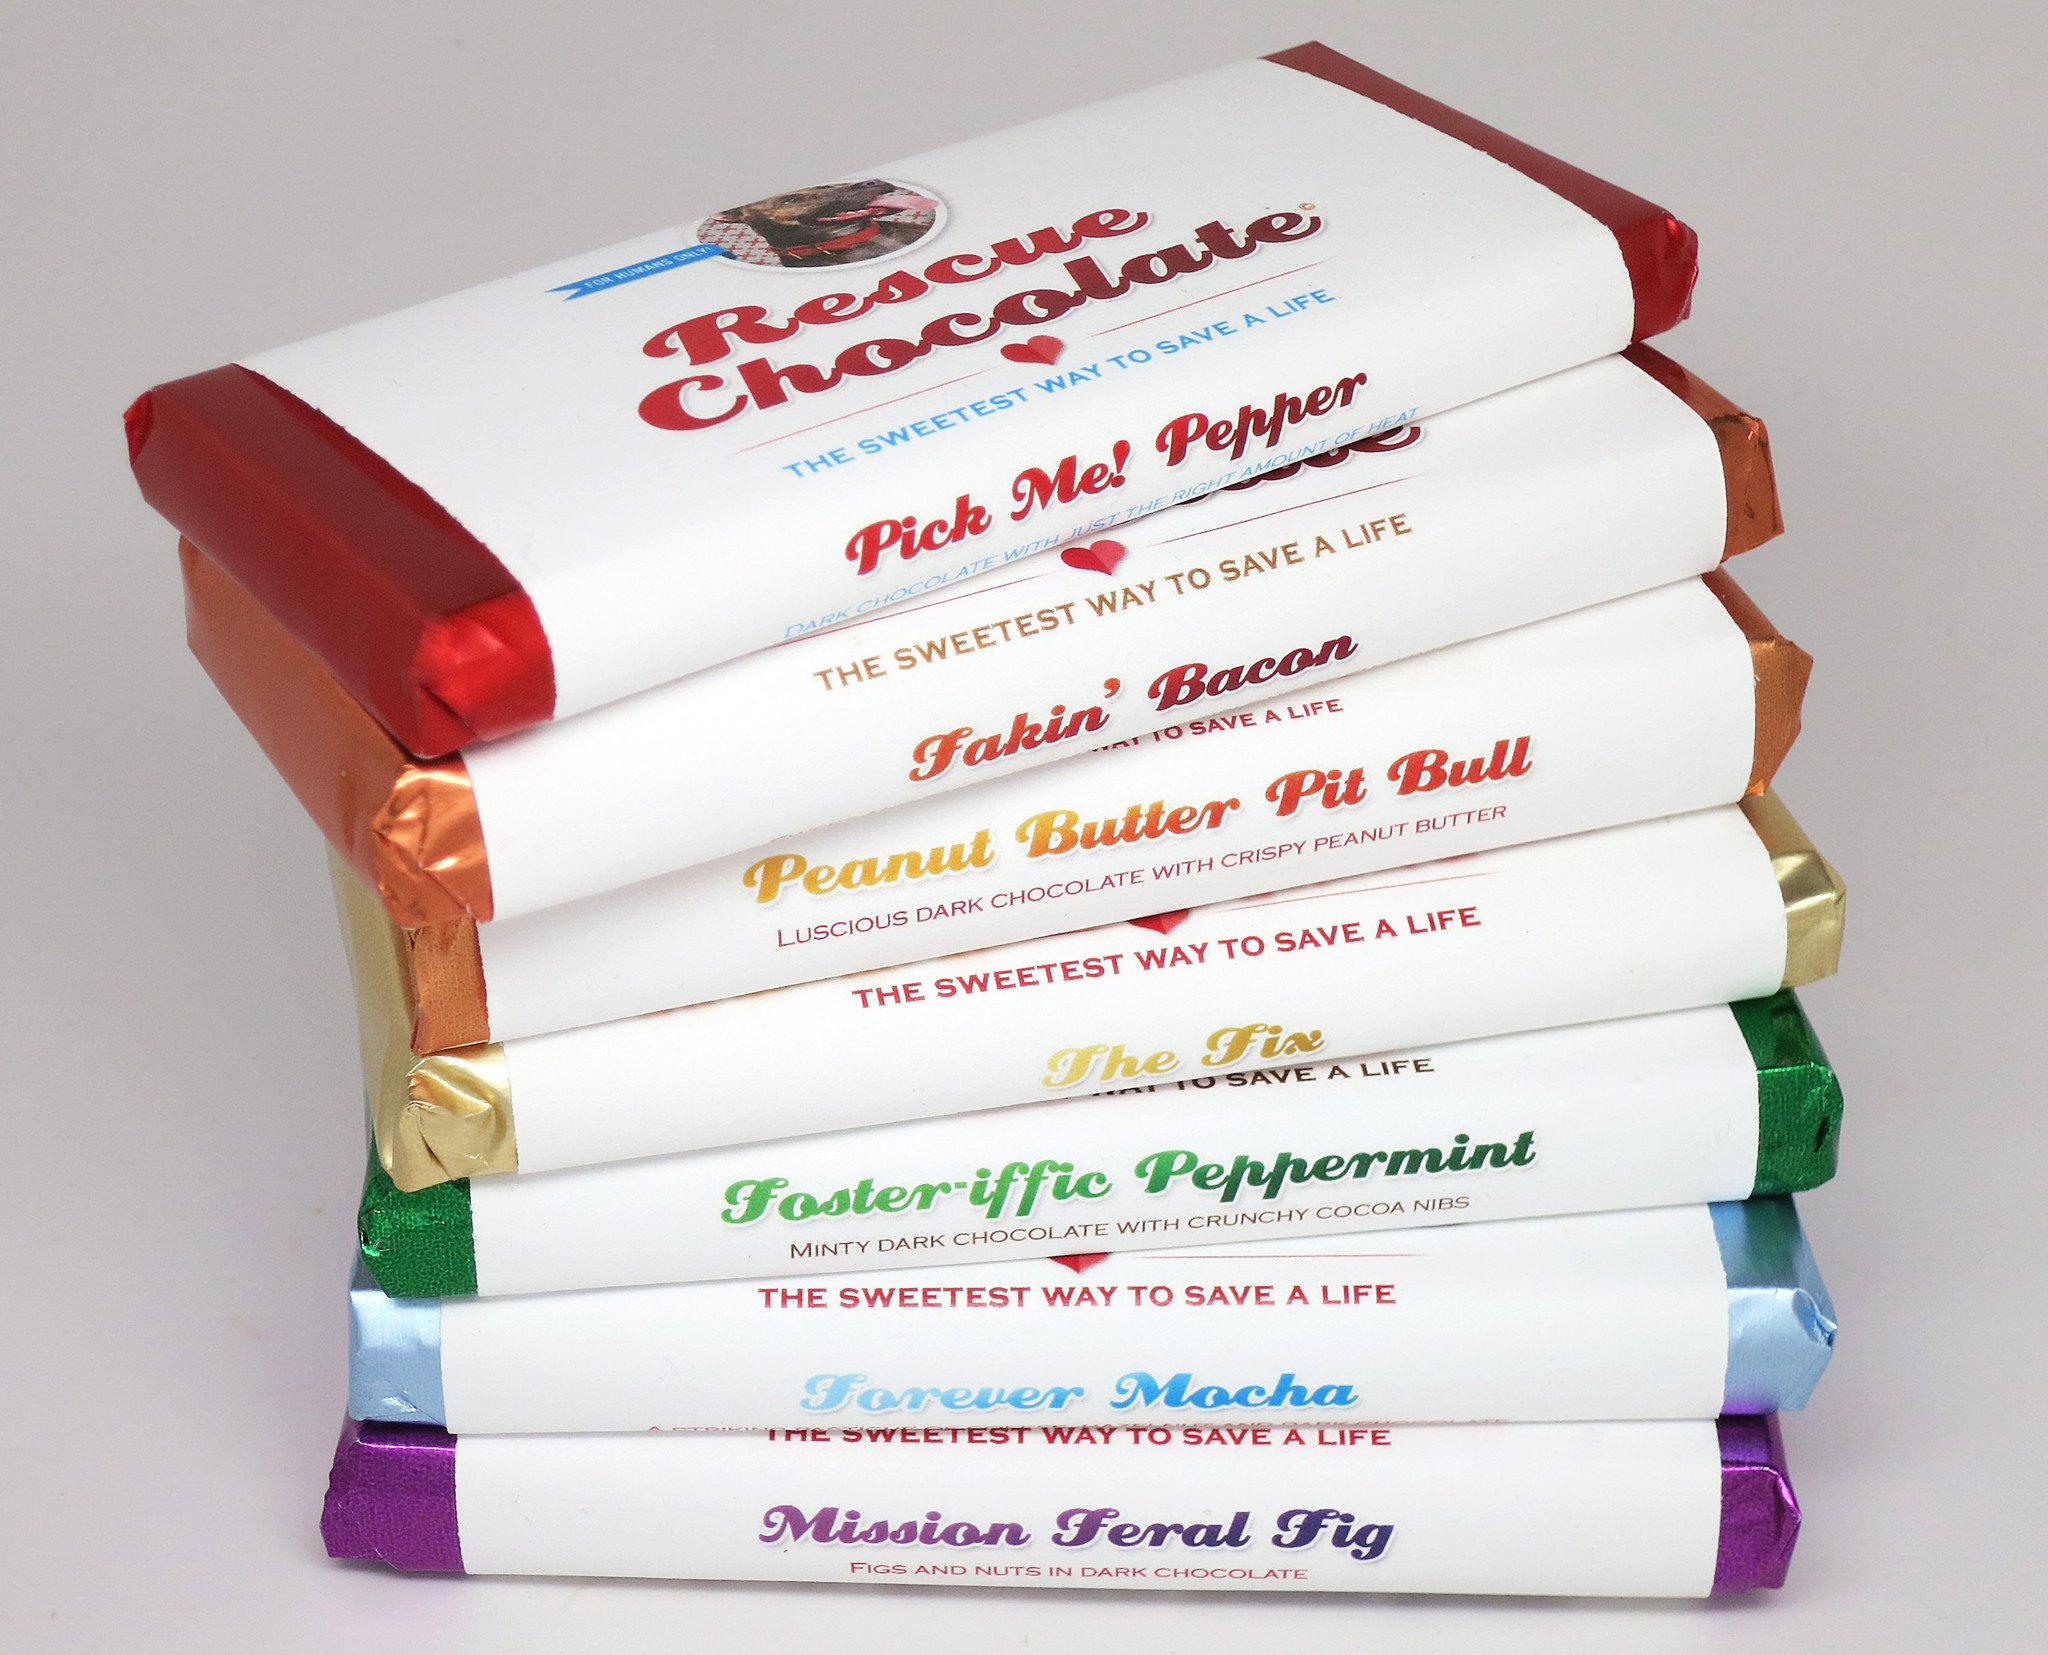 4 Paw Collection Vegan Chocolate Bars To Benefit Dog Rescue, $25 @rescuechocolate.com